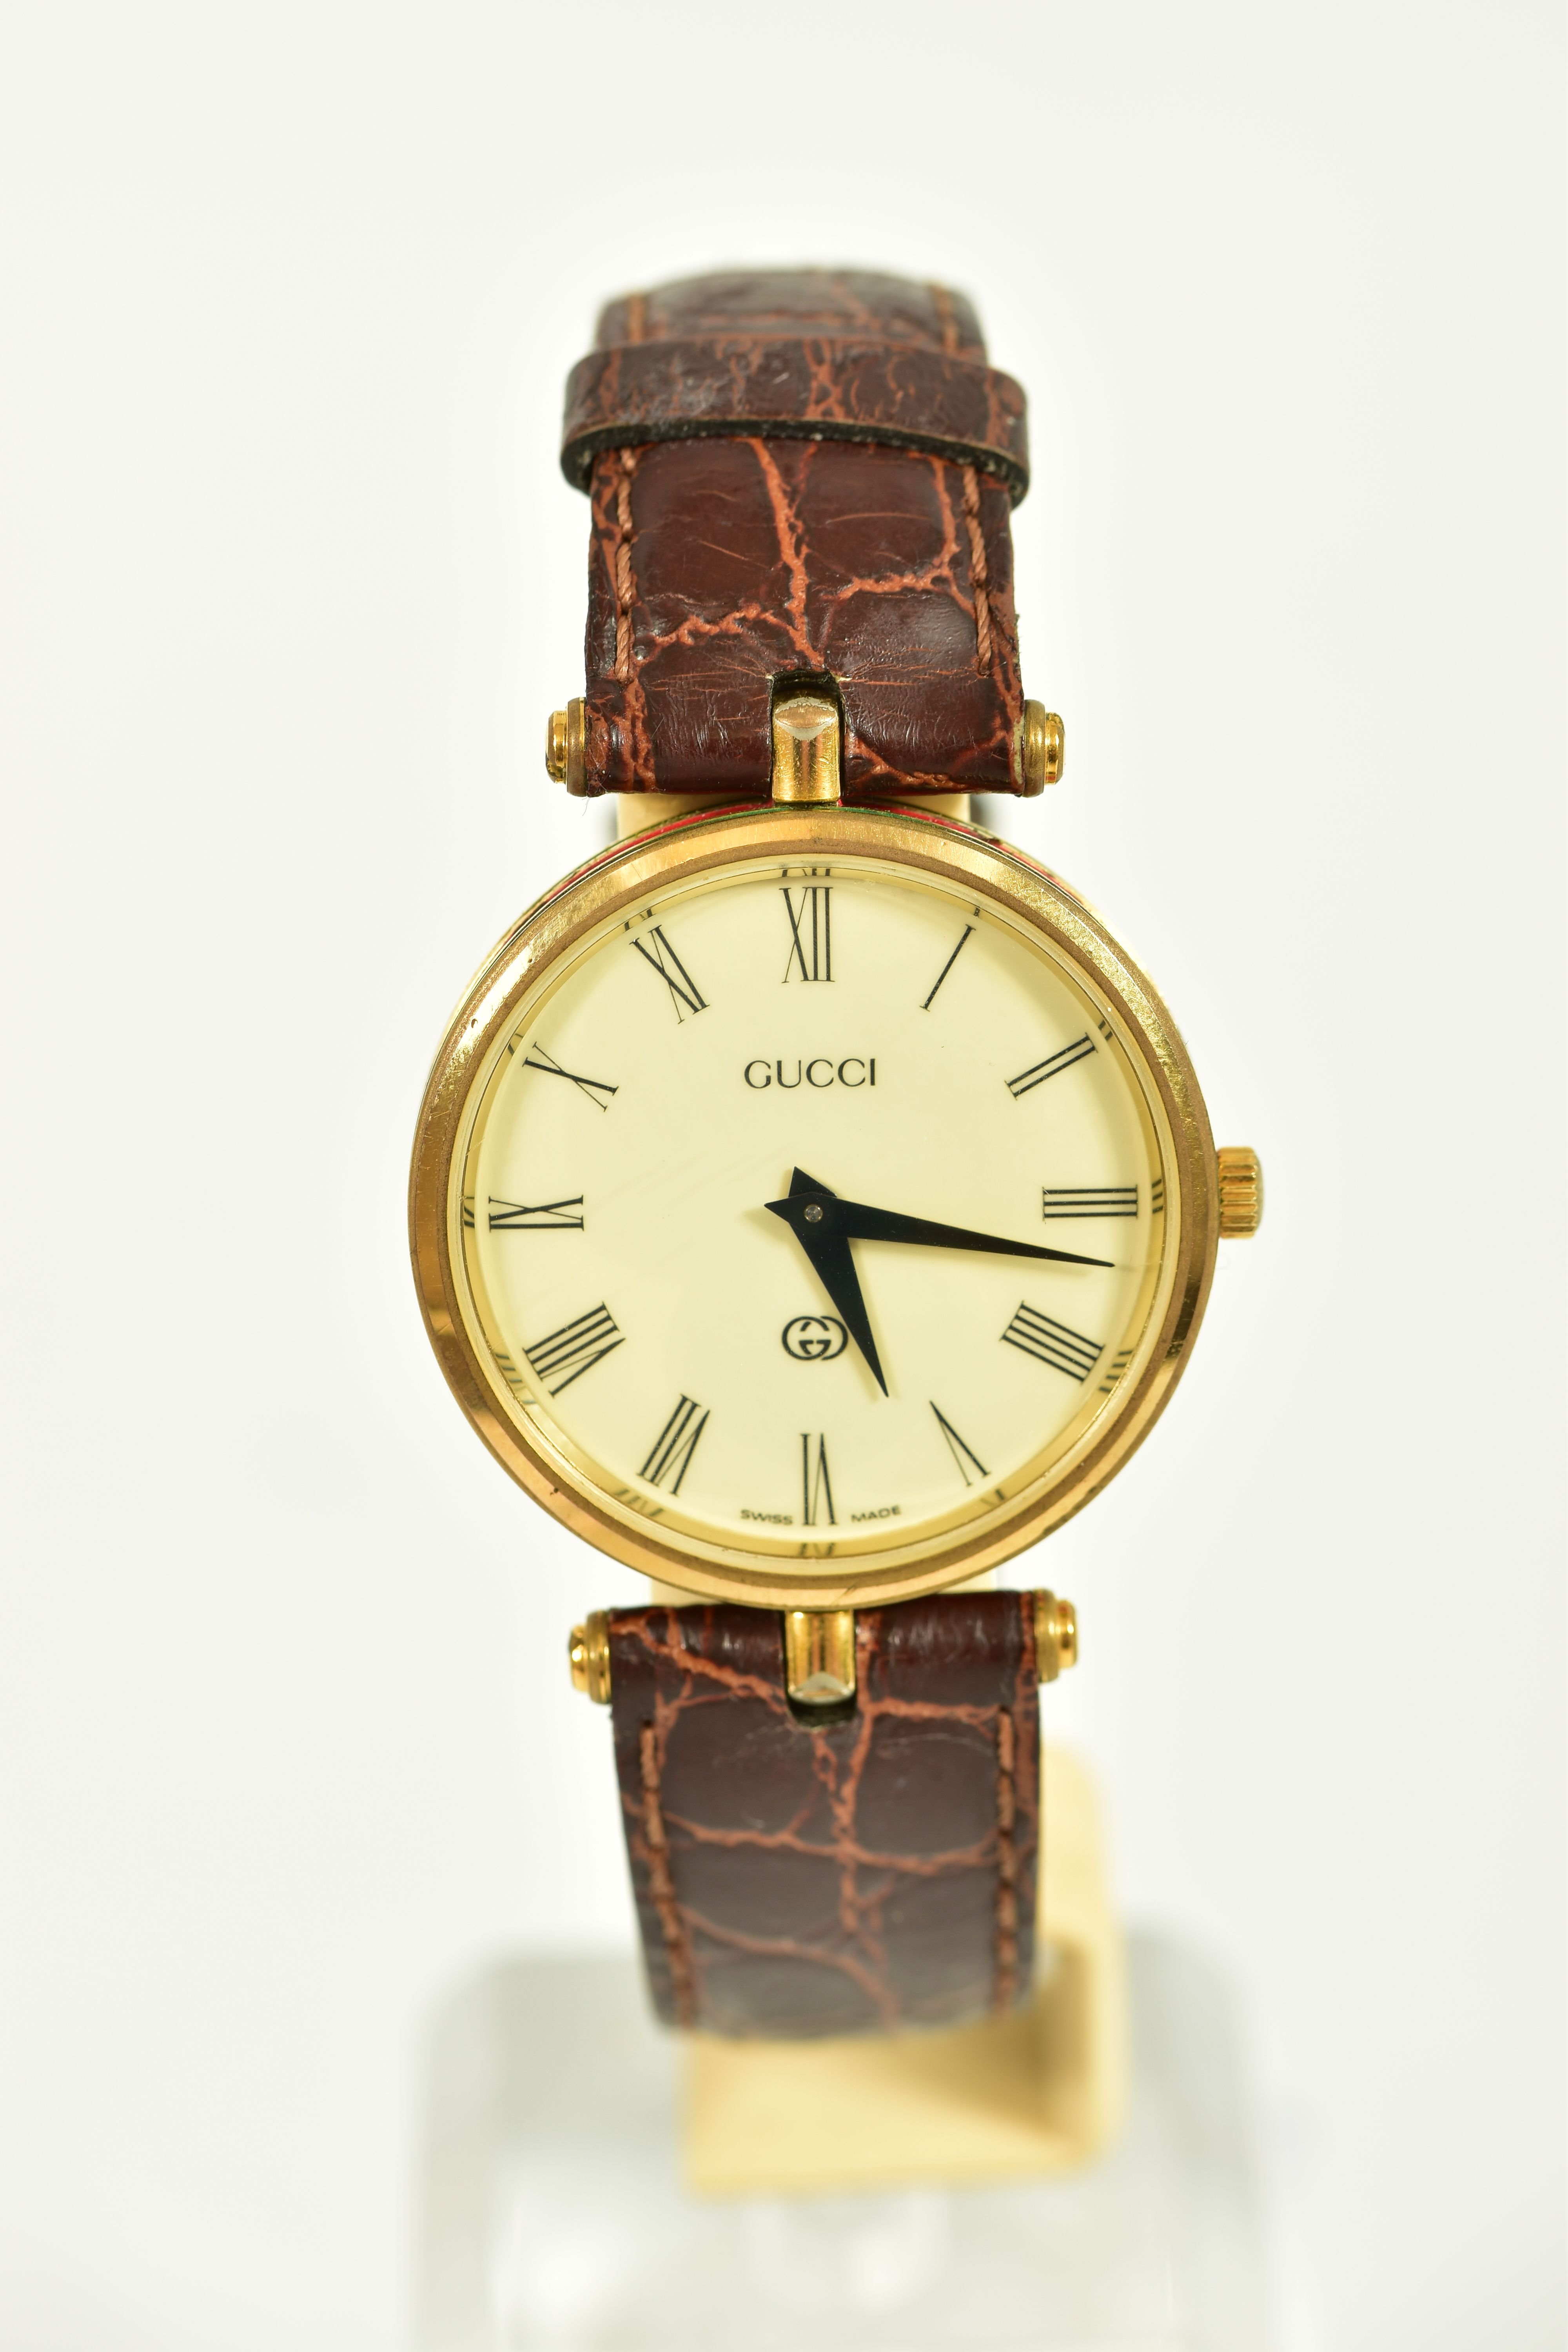 A GOLD-PLATED GUCCI QUARTZ WRISTWATCH, cream dial with roman numerals, round dial with red and green